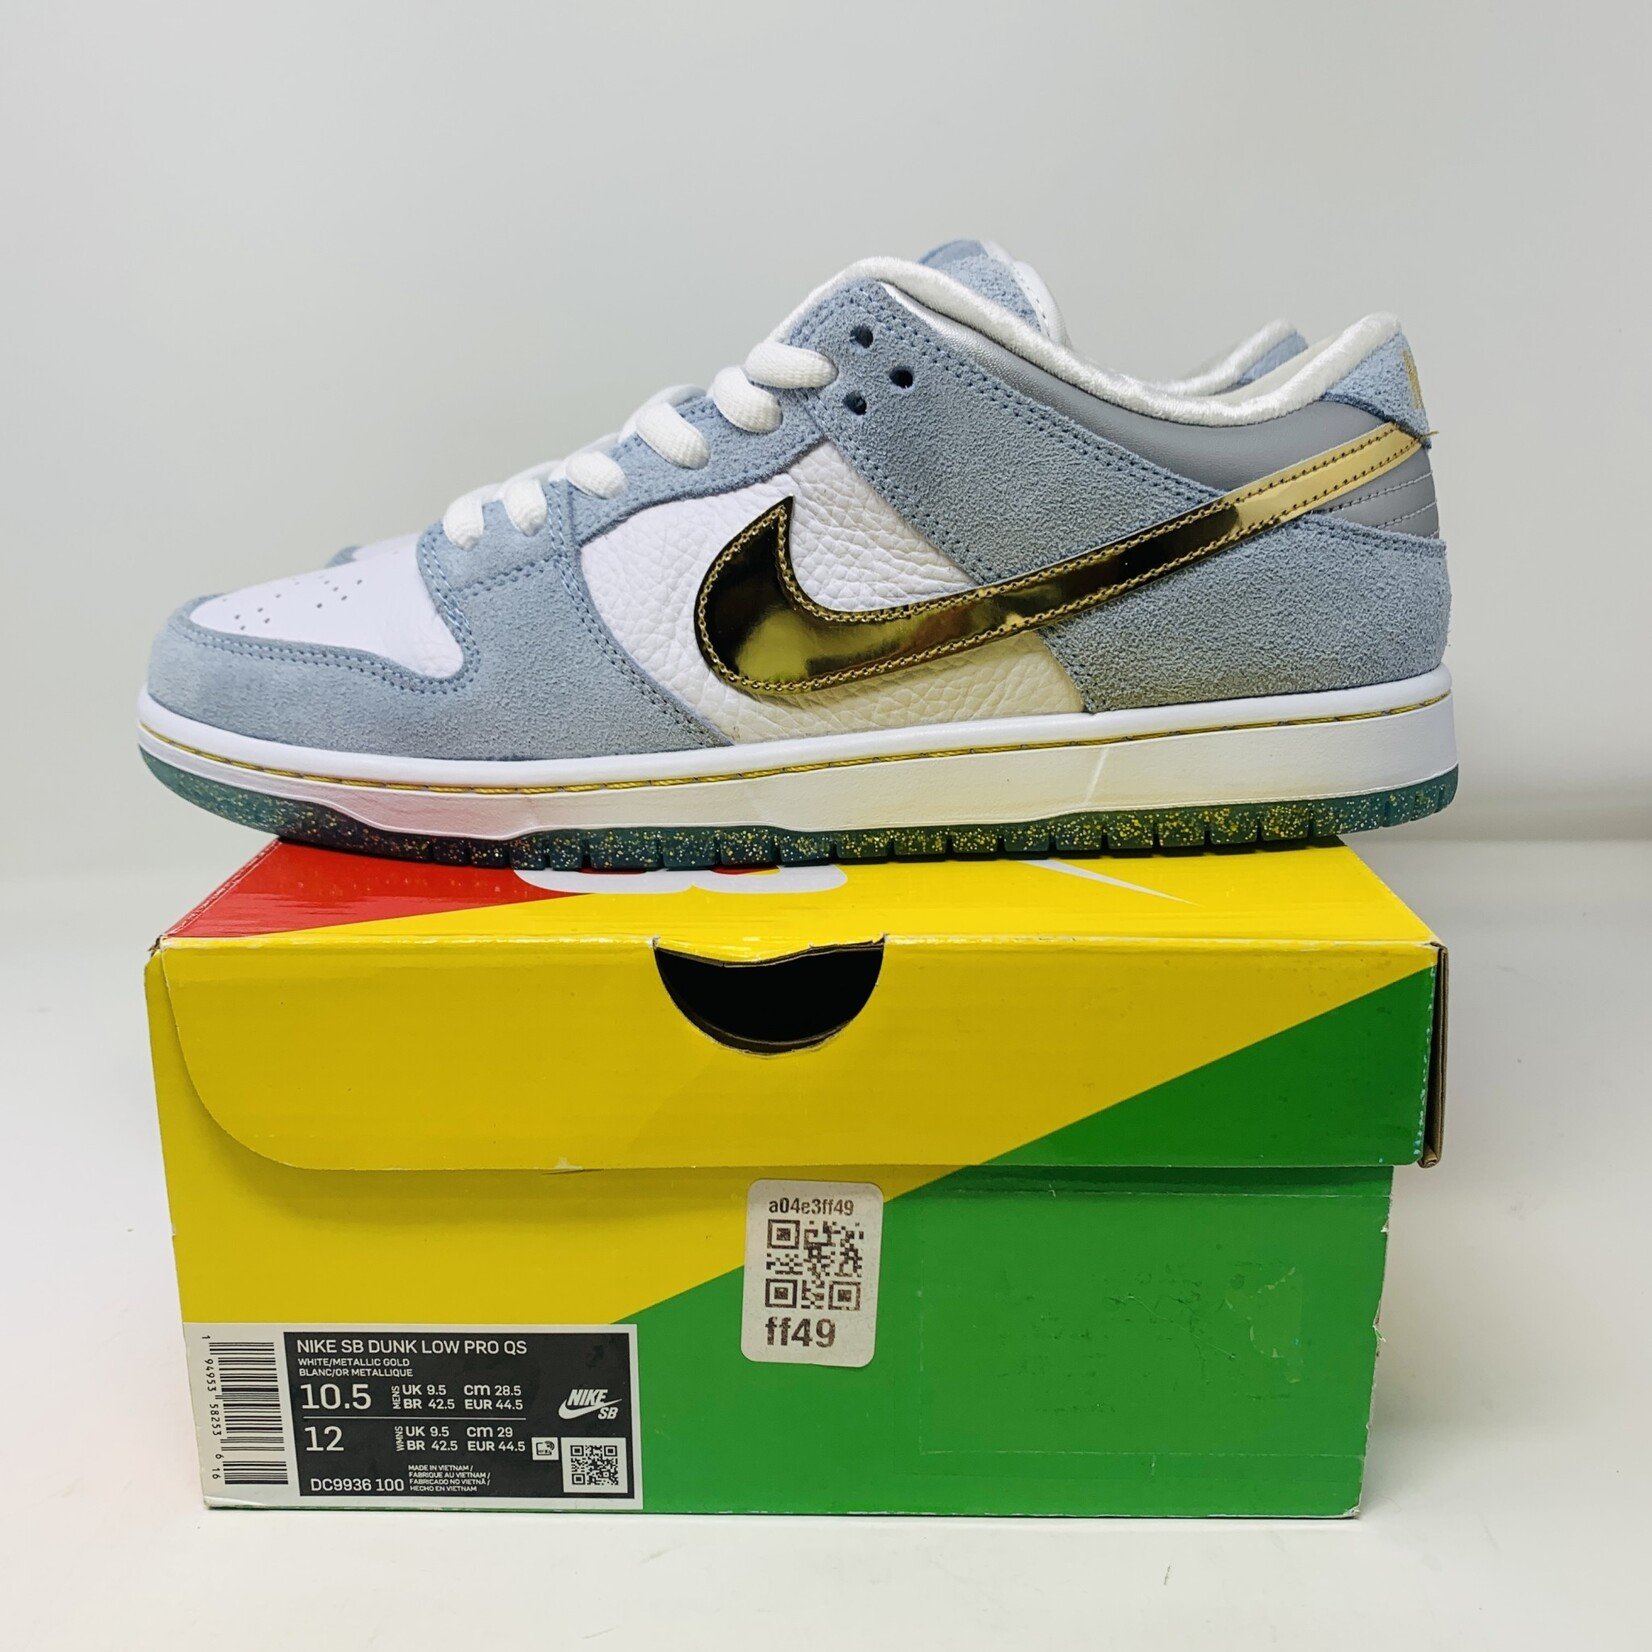 Nike SB Dunk Low Sean Cliver - Holy Ground Sneaker Shop - Buy